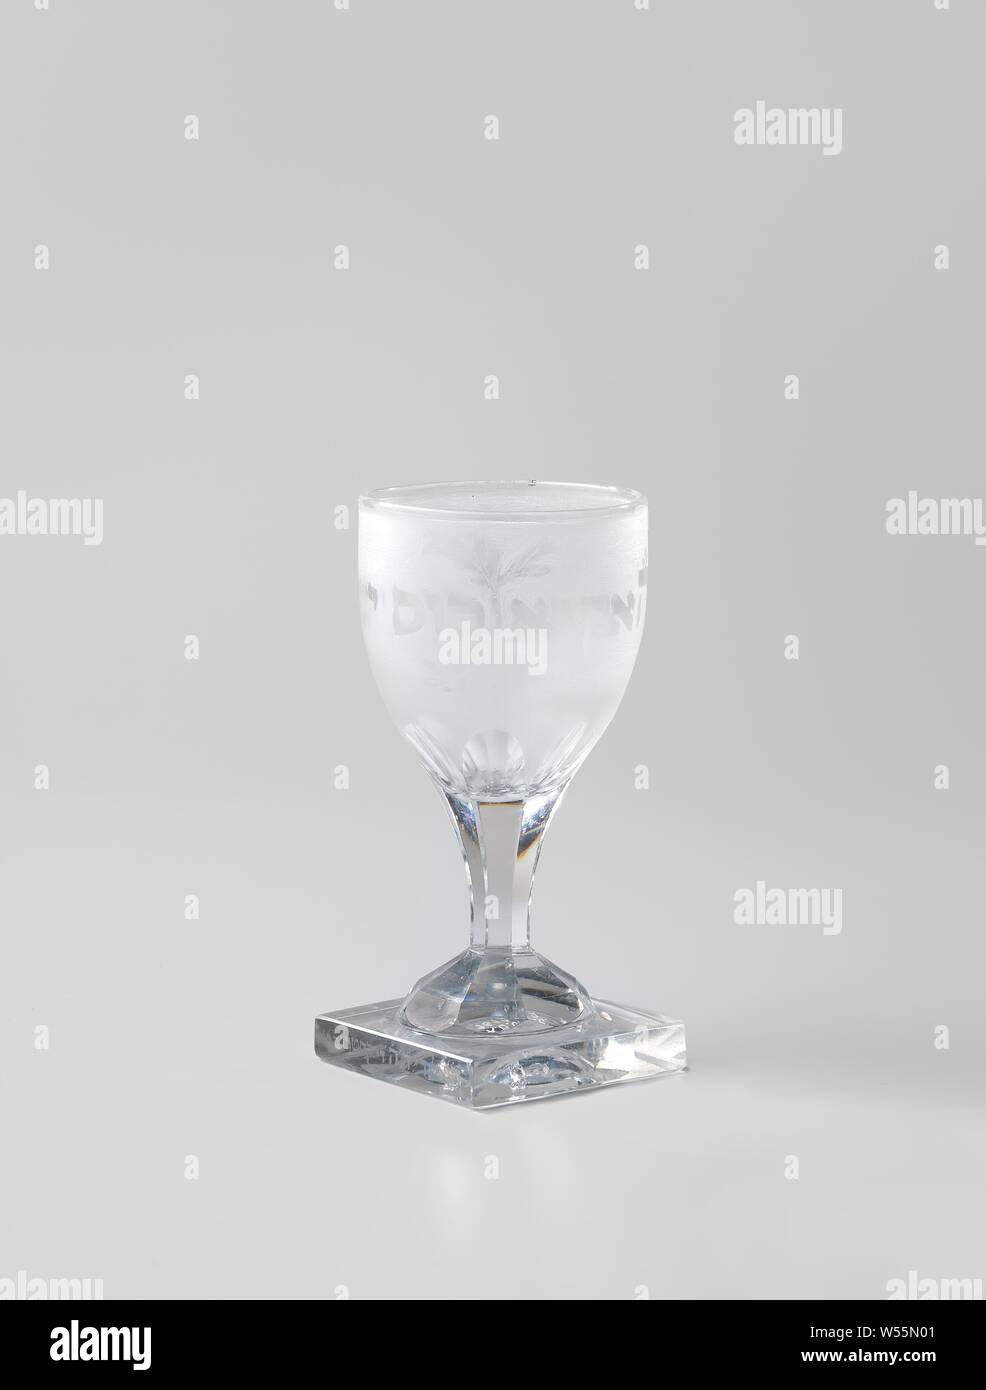 https://c8.alamy.com/comp/W55N01/chalice-on-a-square-plinth-with-hebrew-inscription-circular-convex-carved-base-on-a-square-plinth-flared-facet-cut-trunk-which-merges-into-the-curved-cup-on-the-chalice-against-a-frosted-etched-ground-the-hebrew-text-i-will-receive-the-cup-of-deliverance-and-call-upon-the-name-of-the-lord-psalm-116-13-a-leafy-branch-between-the-first-and-the-last-hebrew-letter-on-the-plinth-in-hebrew-daniel-di-dh-de-castro-5-611-anonymous-c-1851-glass-glassblowing-h-123-cm-w-57-cm-d-55-cm-W55N01.jpg